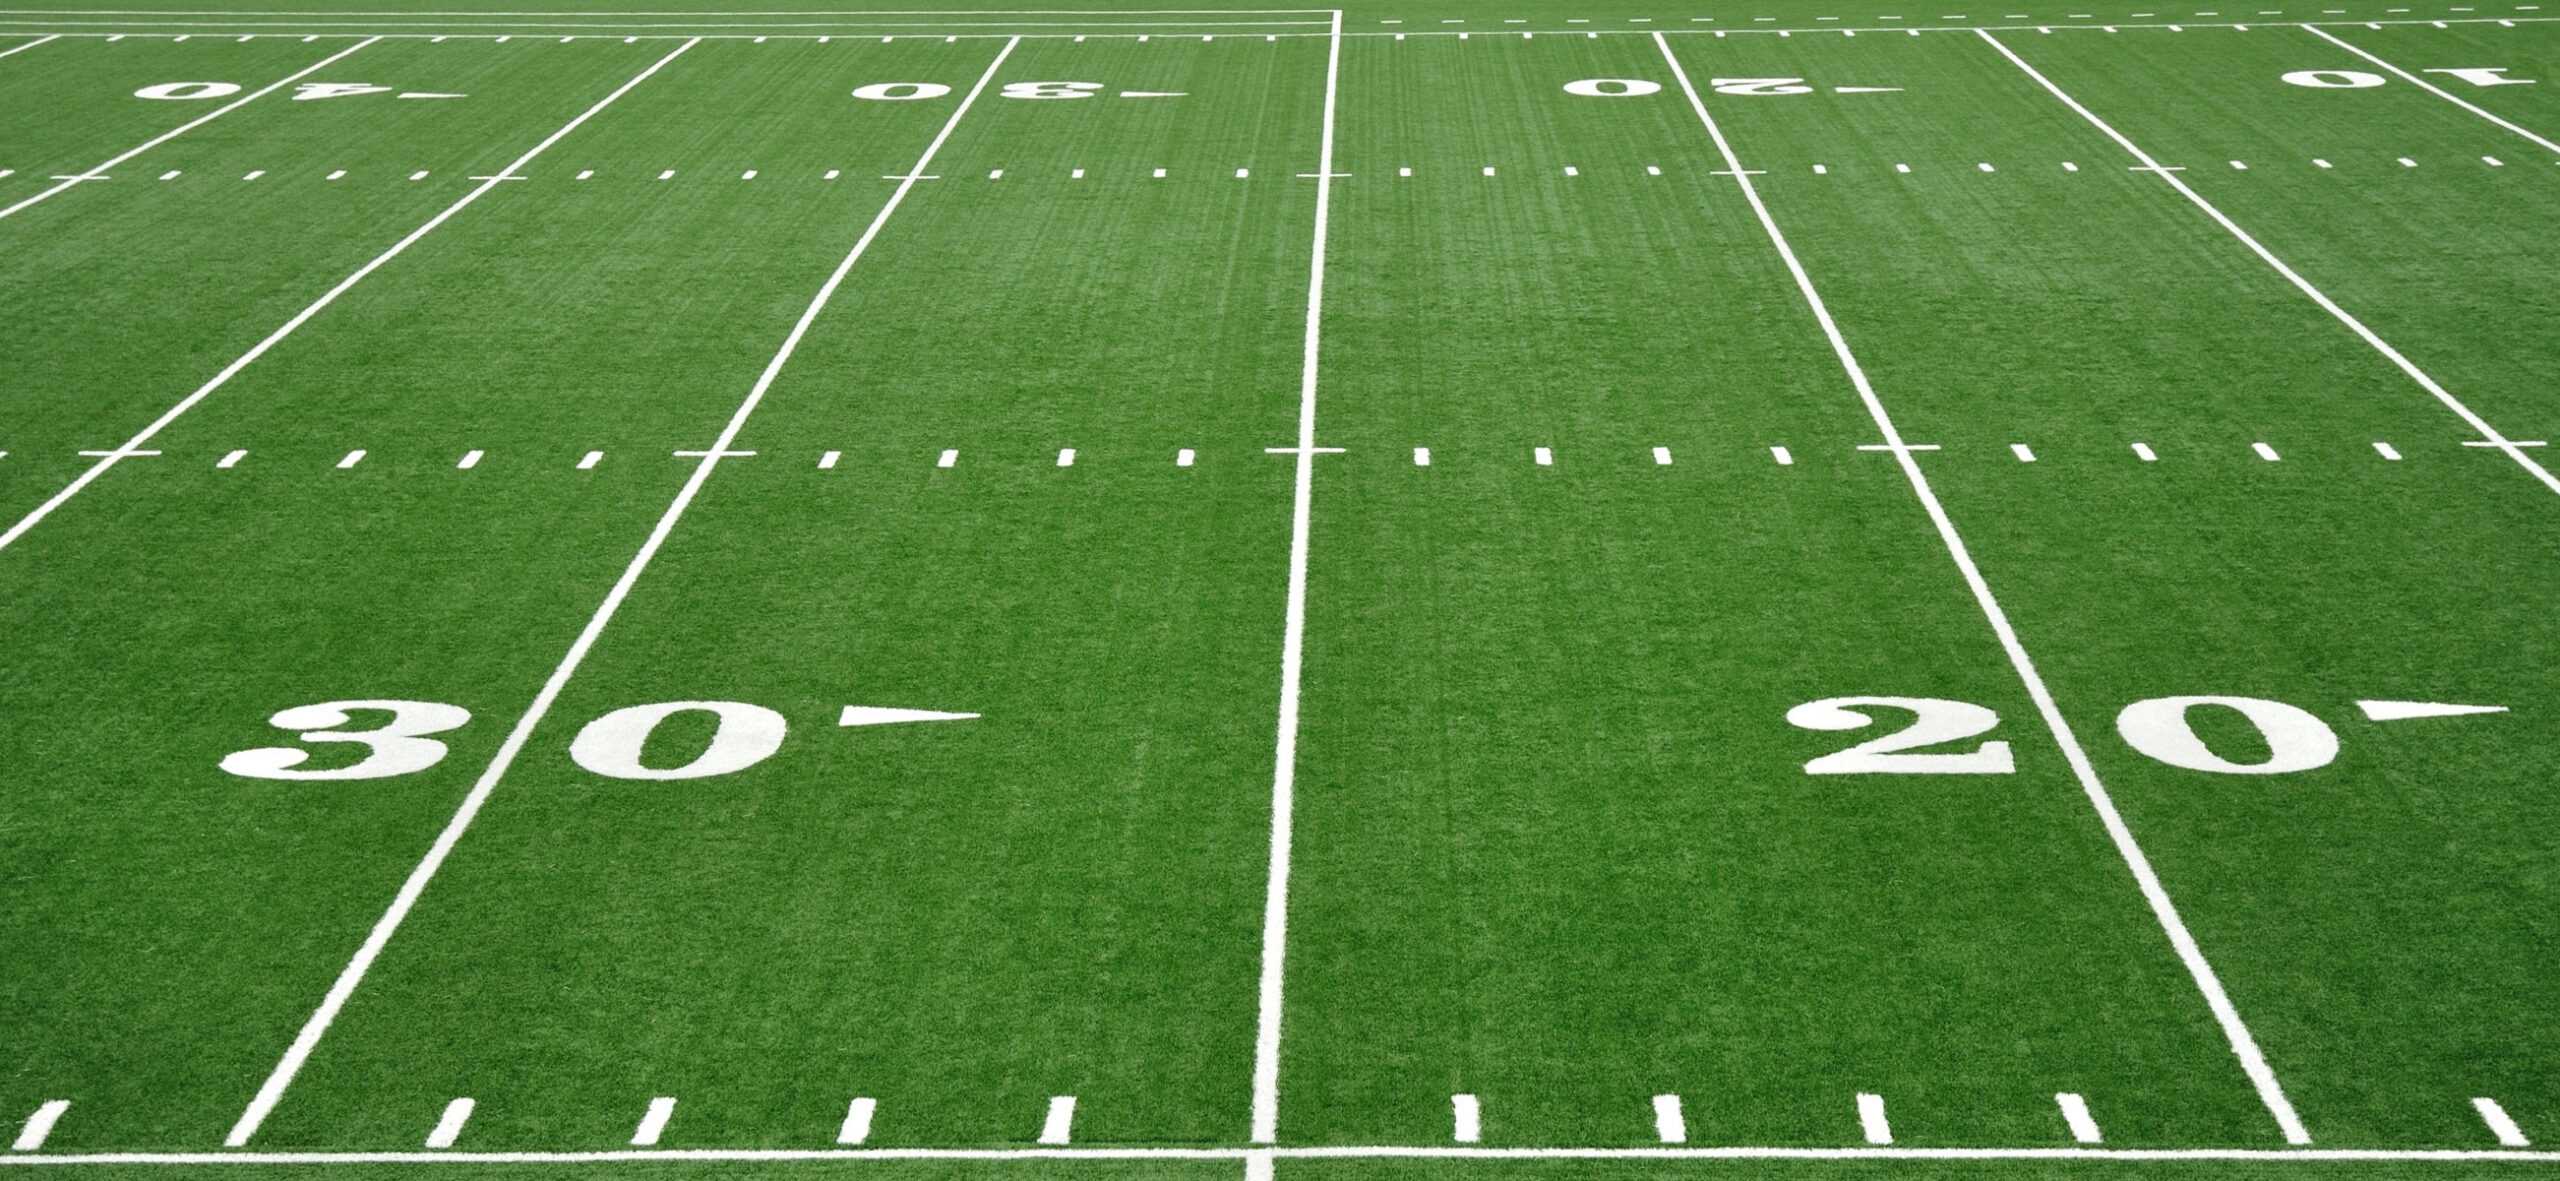 Football Field Blank Template - Imgflip For Blank Football Field Template